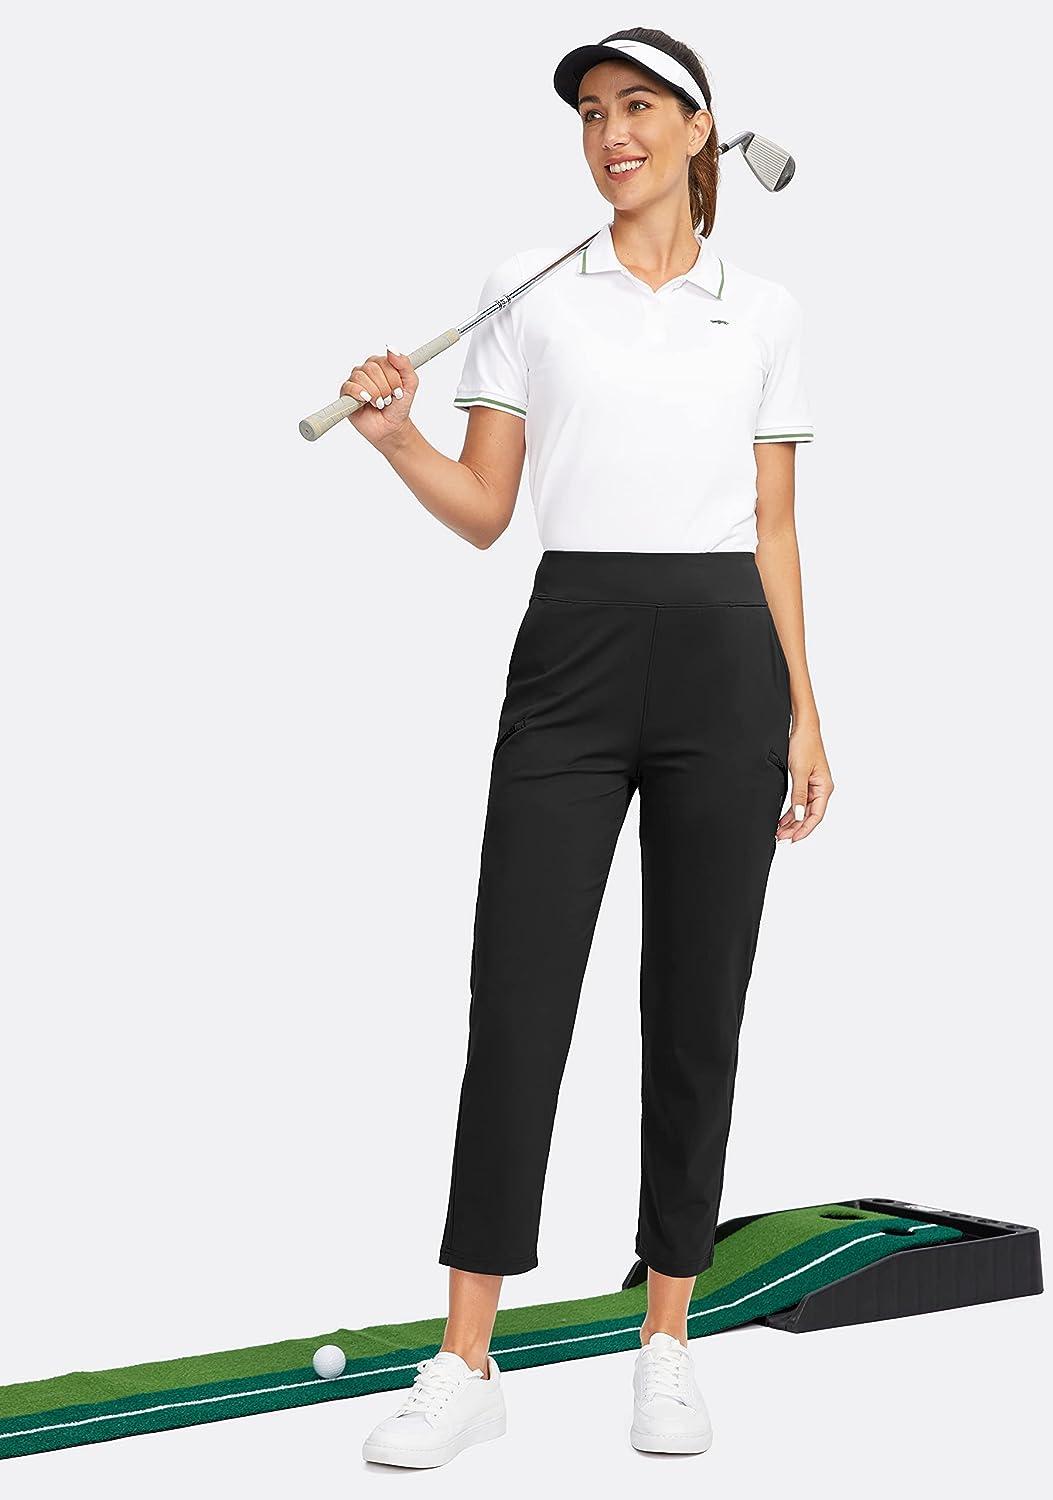 SANTINY Women's Golf Pants with 3 Zipper Pockets 7/8 Stretch High Waisted  Ankle Pants for Women Travel Work Black Medium